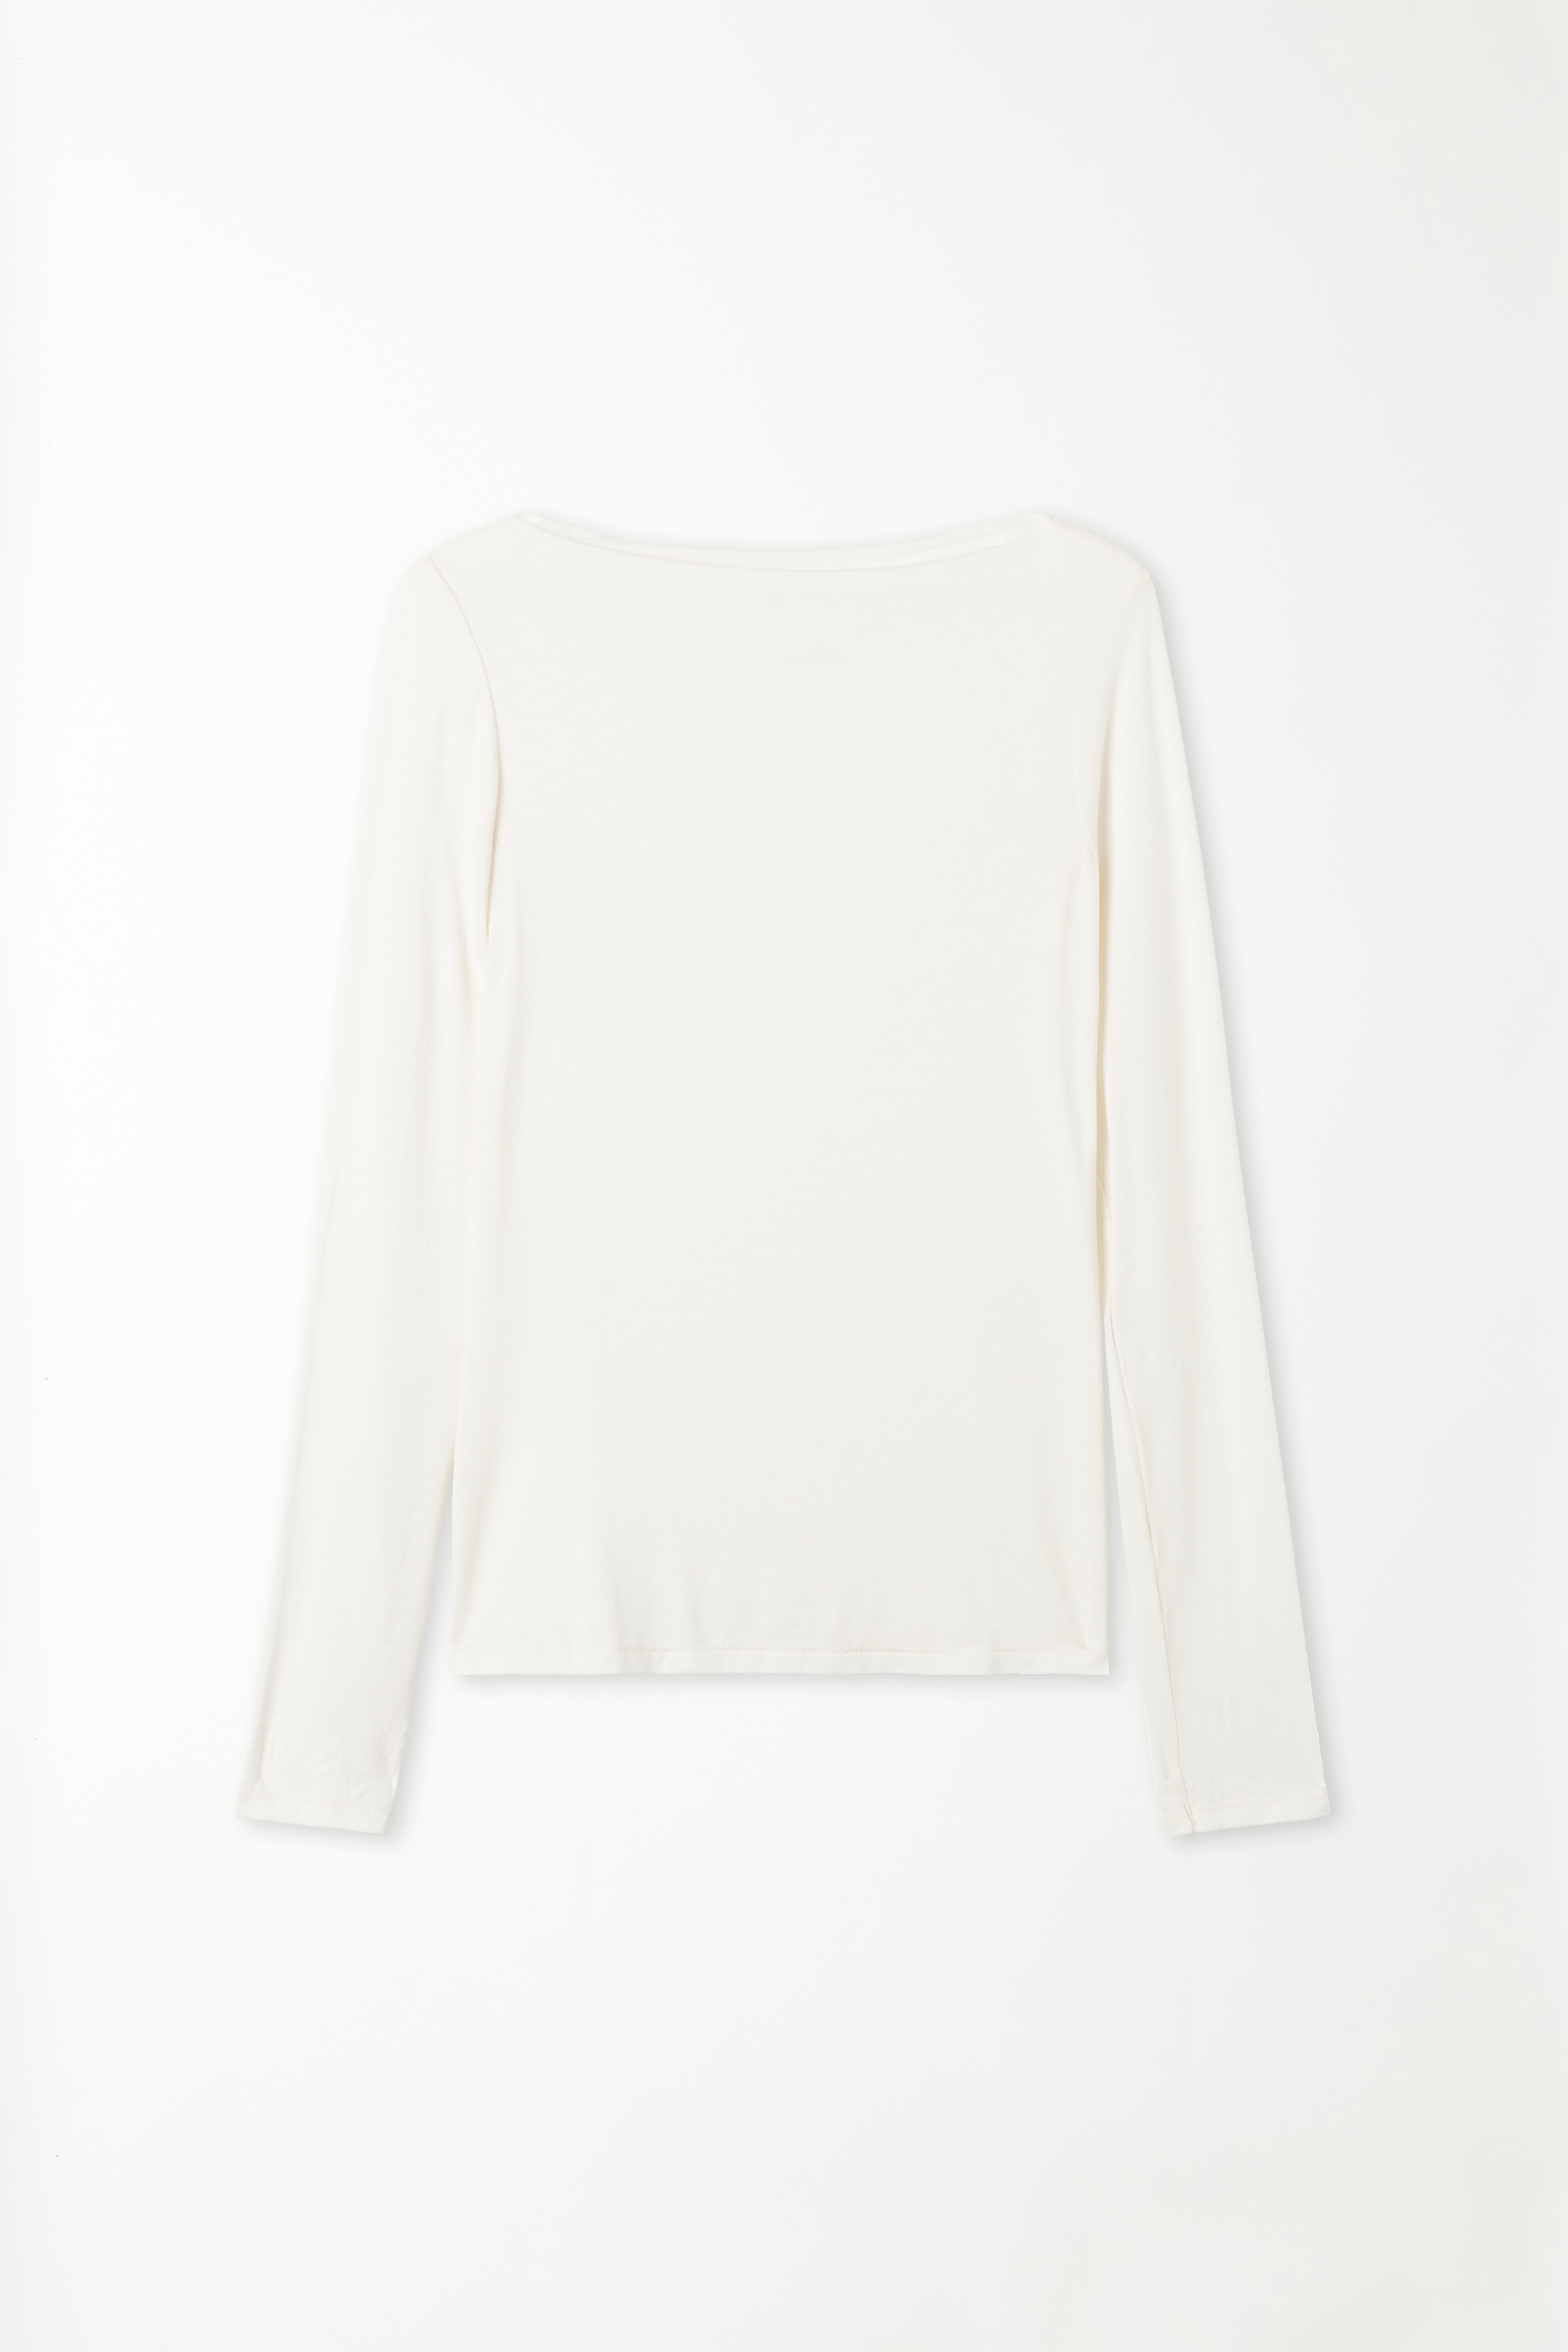 Long-Sleeved Viscose Top with Boat Neck